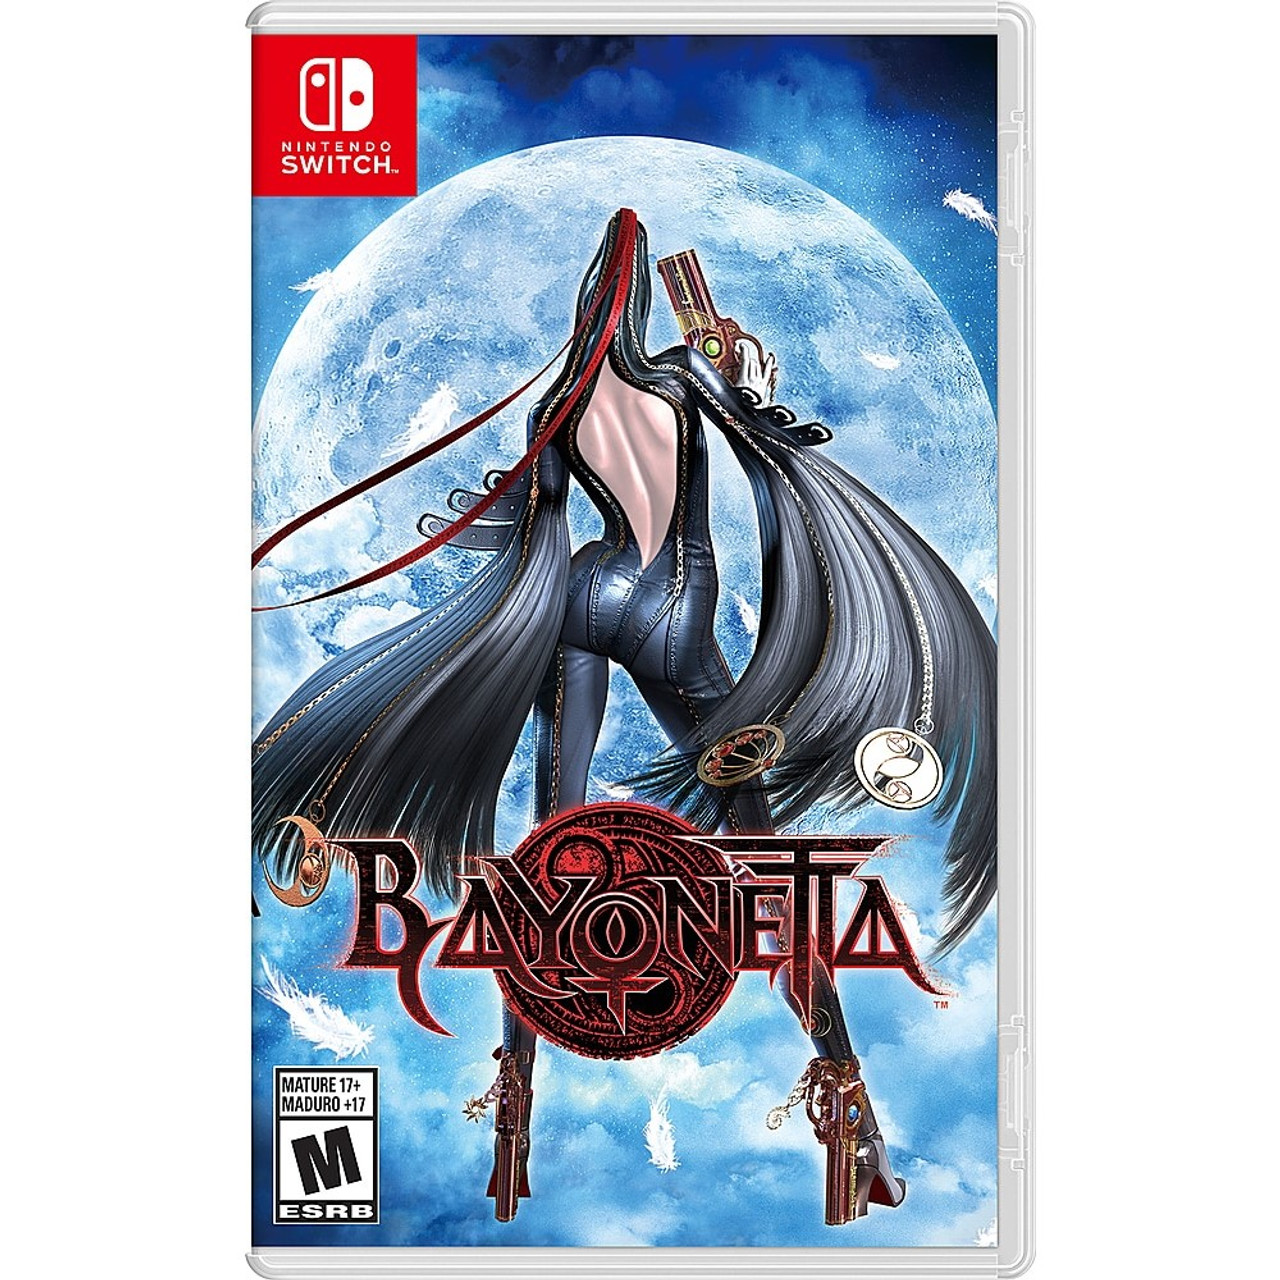 Bayonetta 2 Switch has a reversible cover for Bayonetta 1